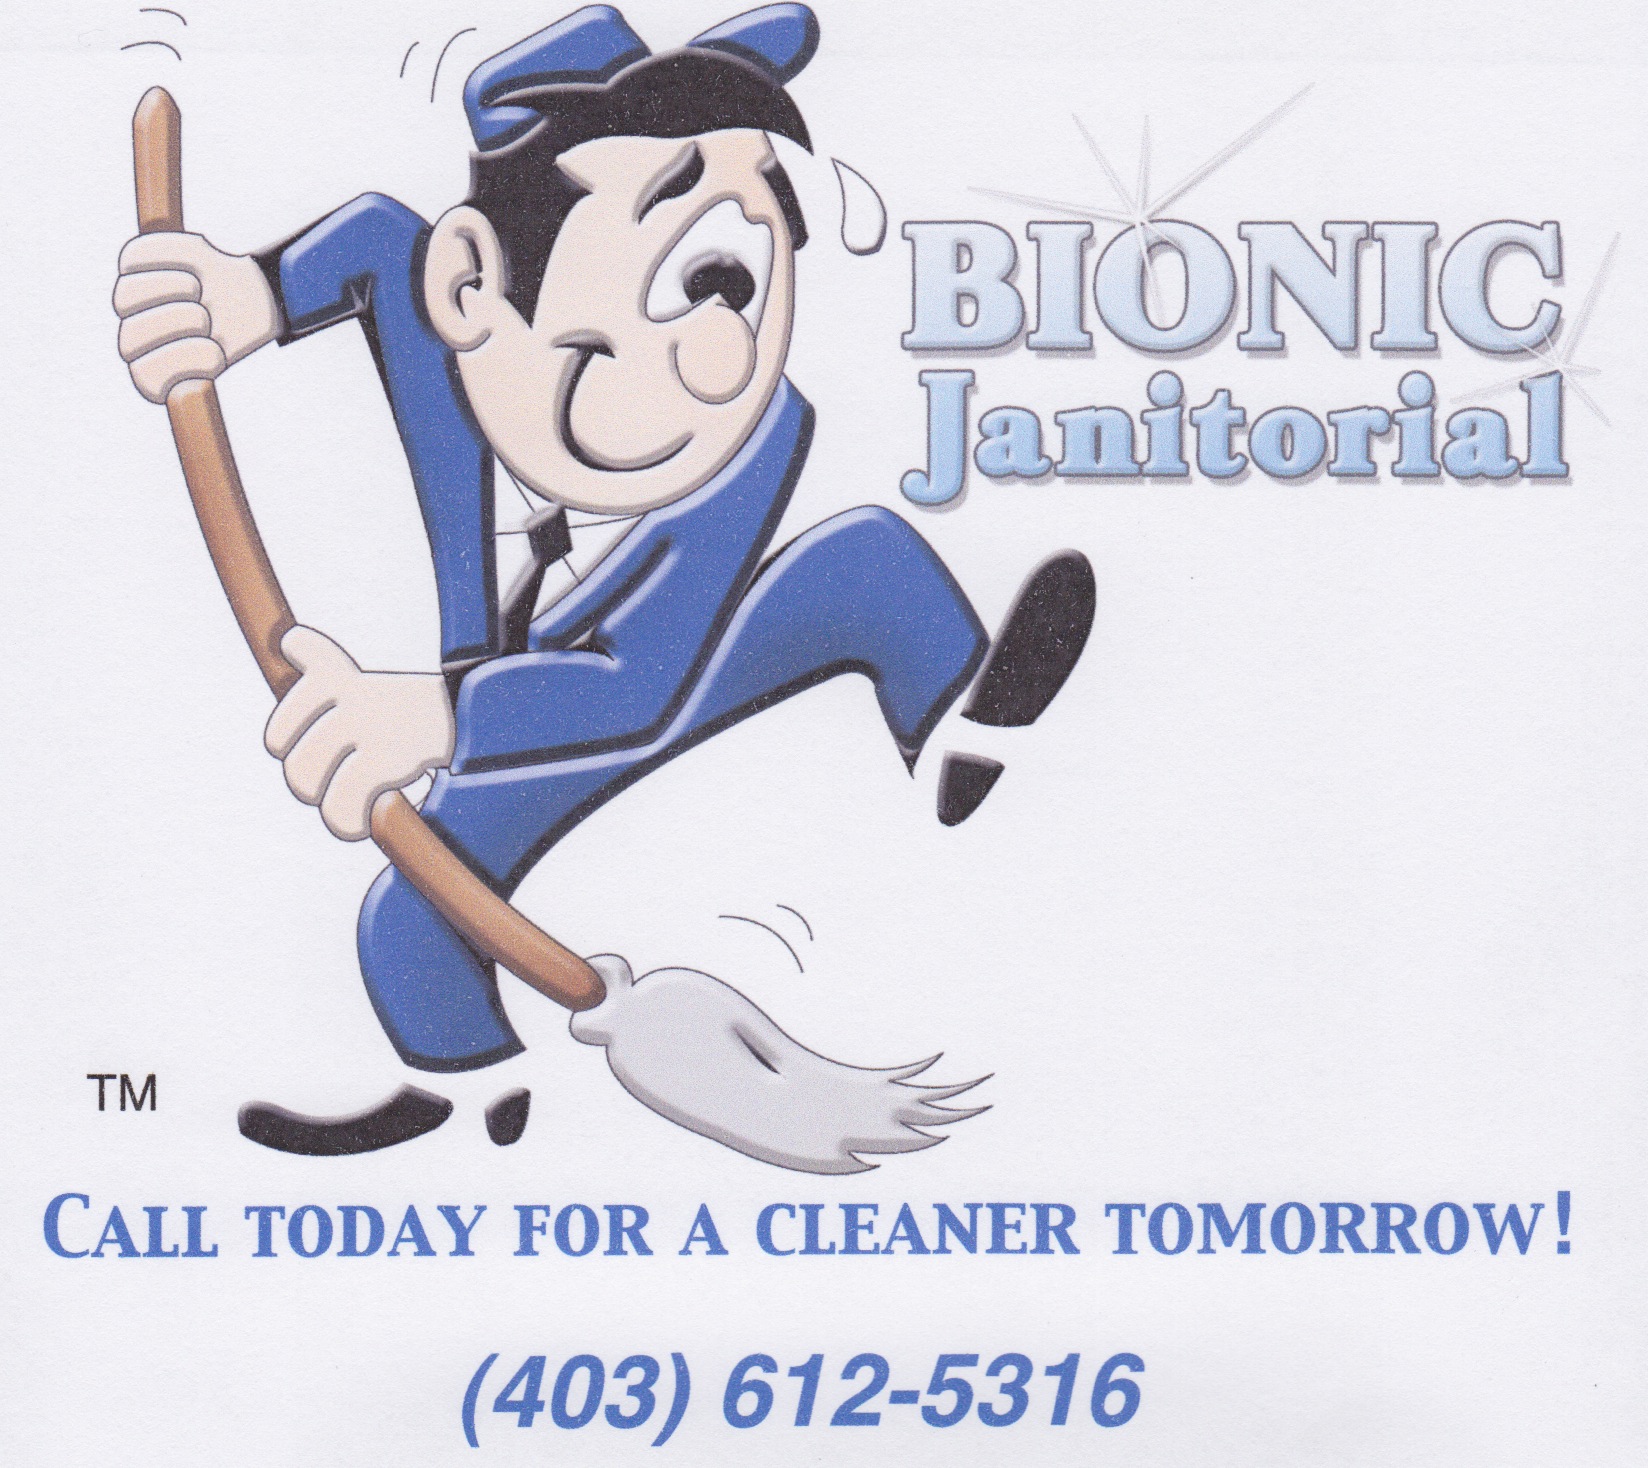 Bionic Janitorial